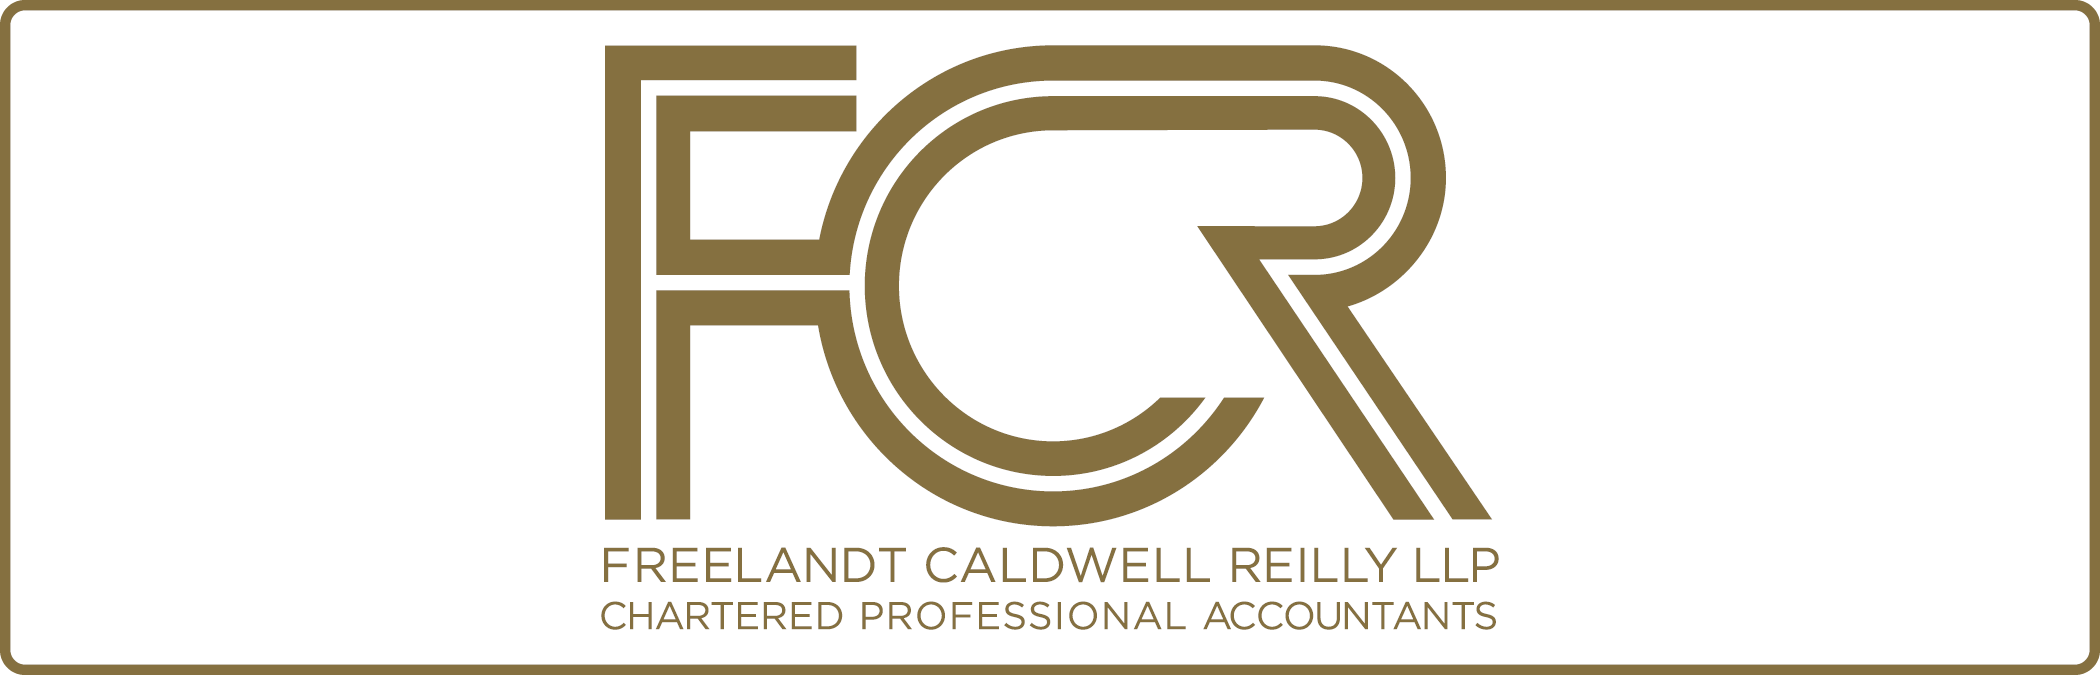 Freelandt Caldwell Reilly LLP Chartered Accountants